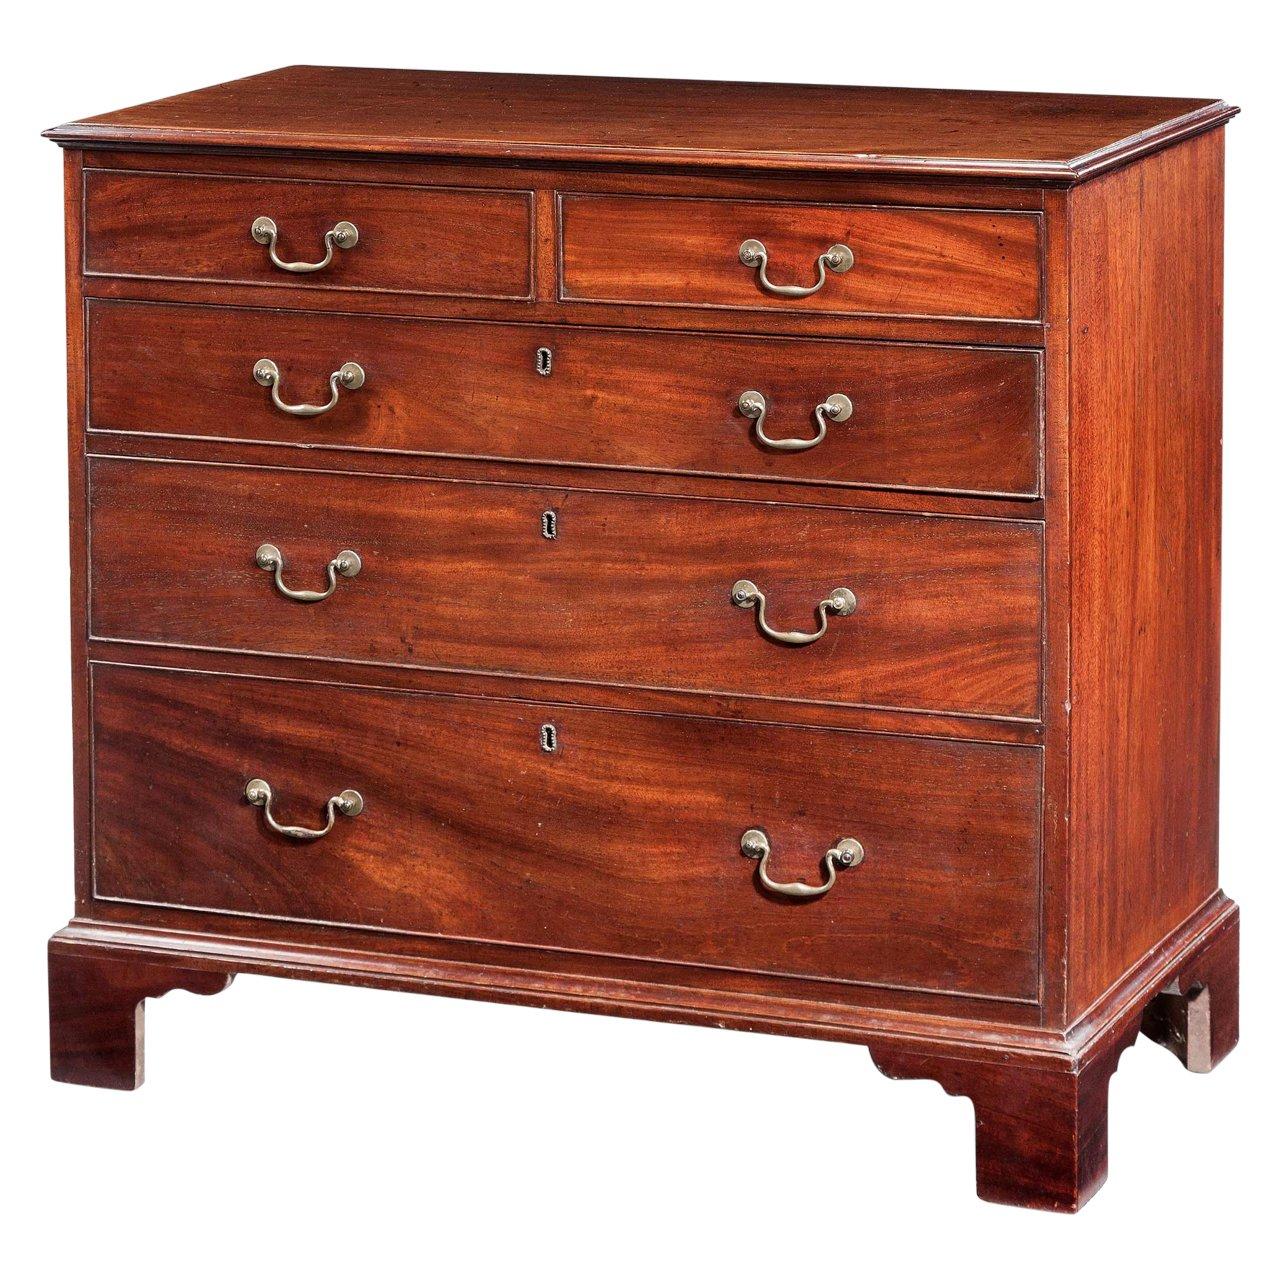 George III Period Mahogany Chest of Drawers with Original Handles